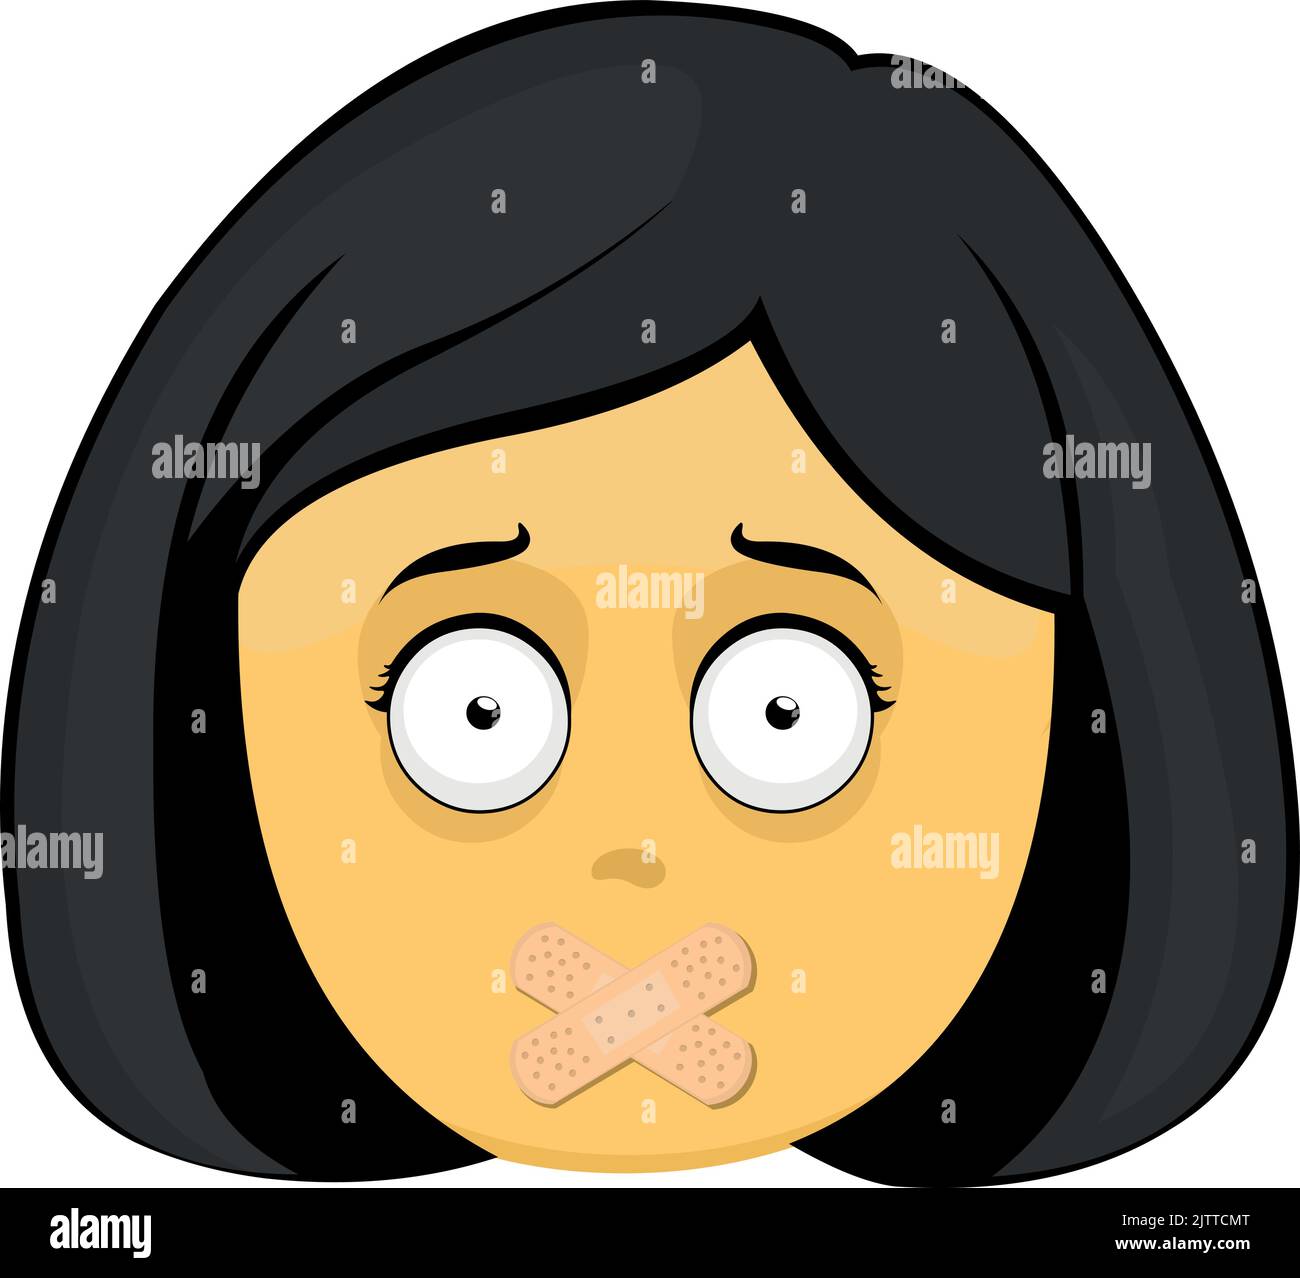 Vector emoji illustration of a yellow cartoon woman with an adhesive band on her mouth Stock Vector